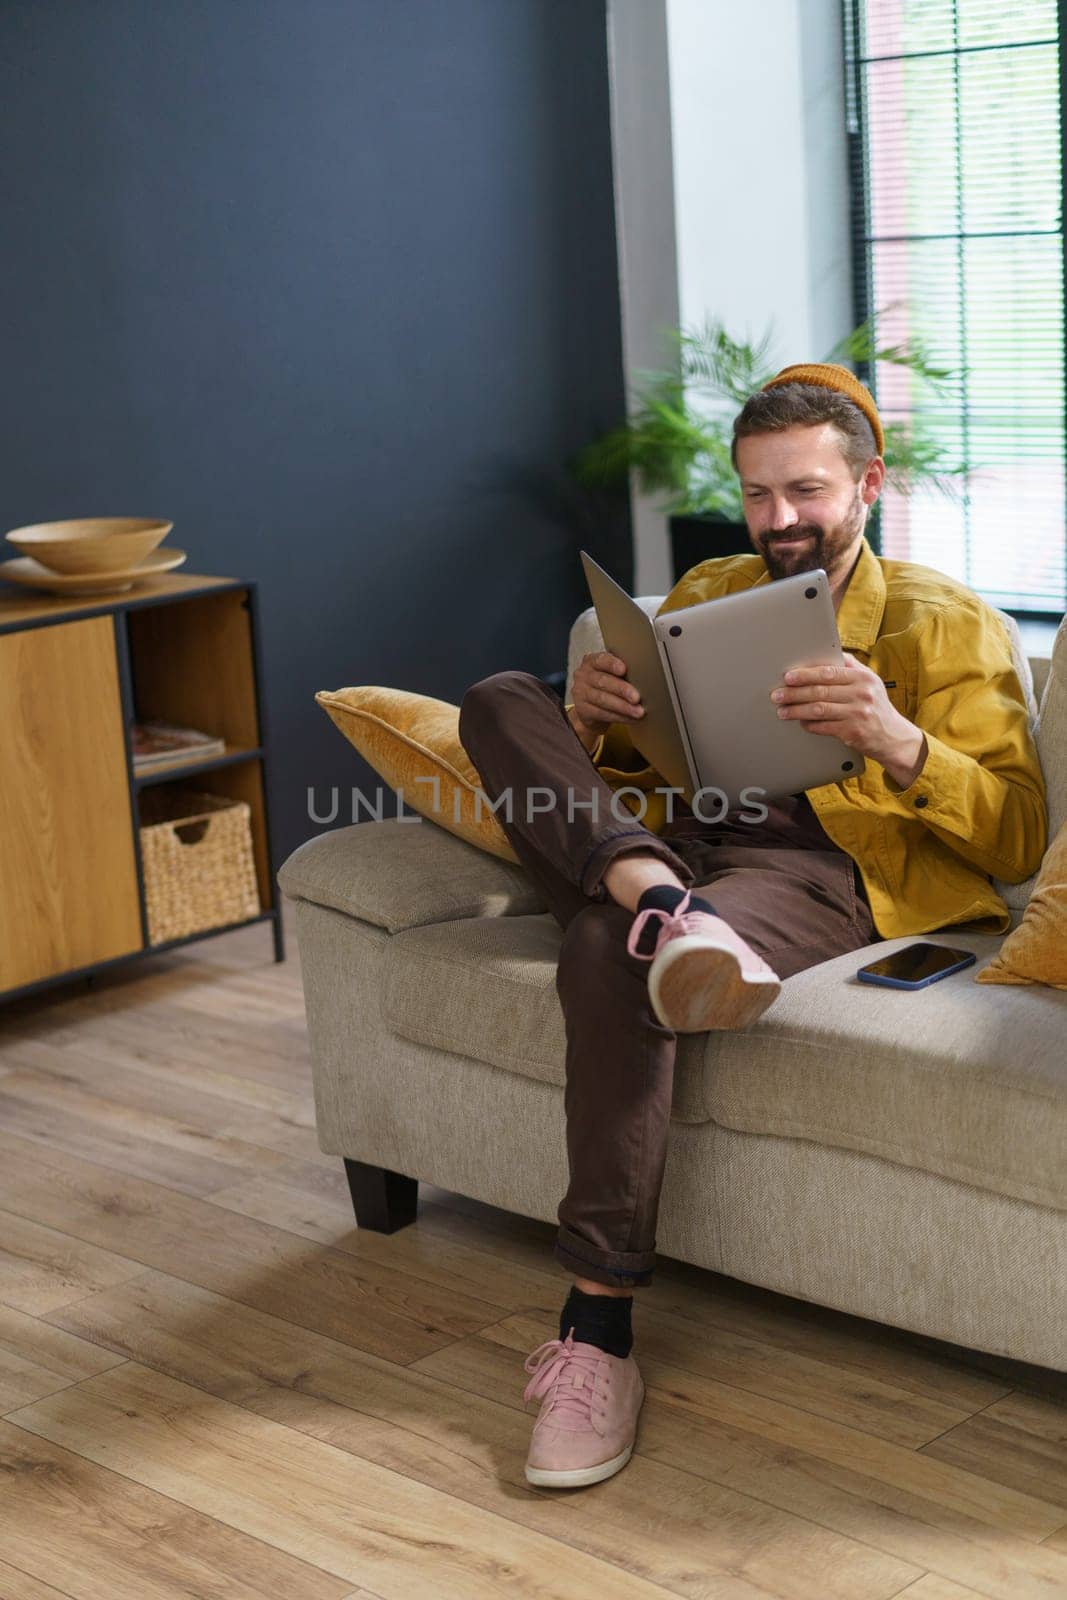 man sitting with laptop in incorrect position, showcasing ineptitude as worker. Man's lack of proper work habits and efficiency reads laptop like book, displaying misguided approach to using device. High quality photo